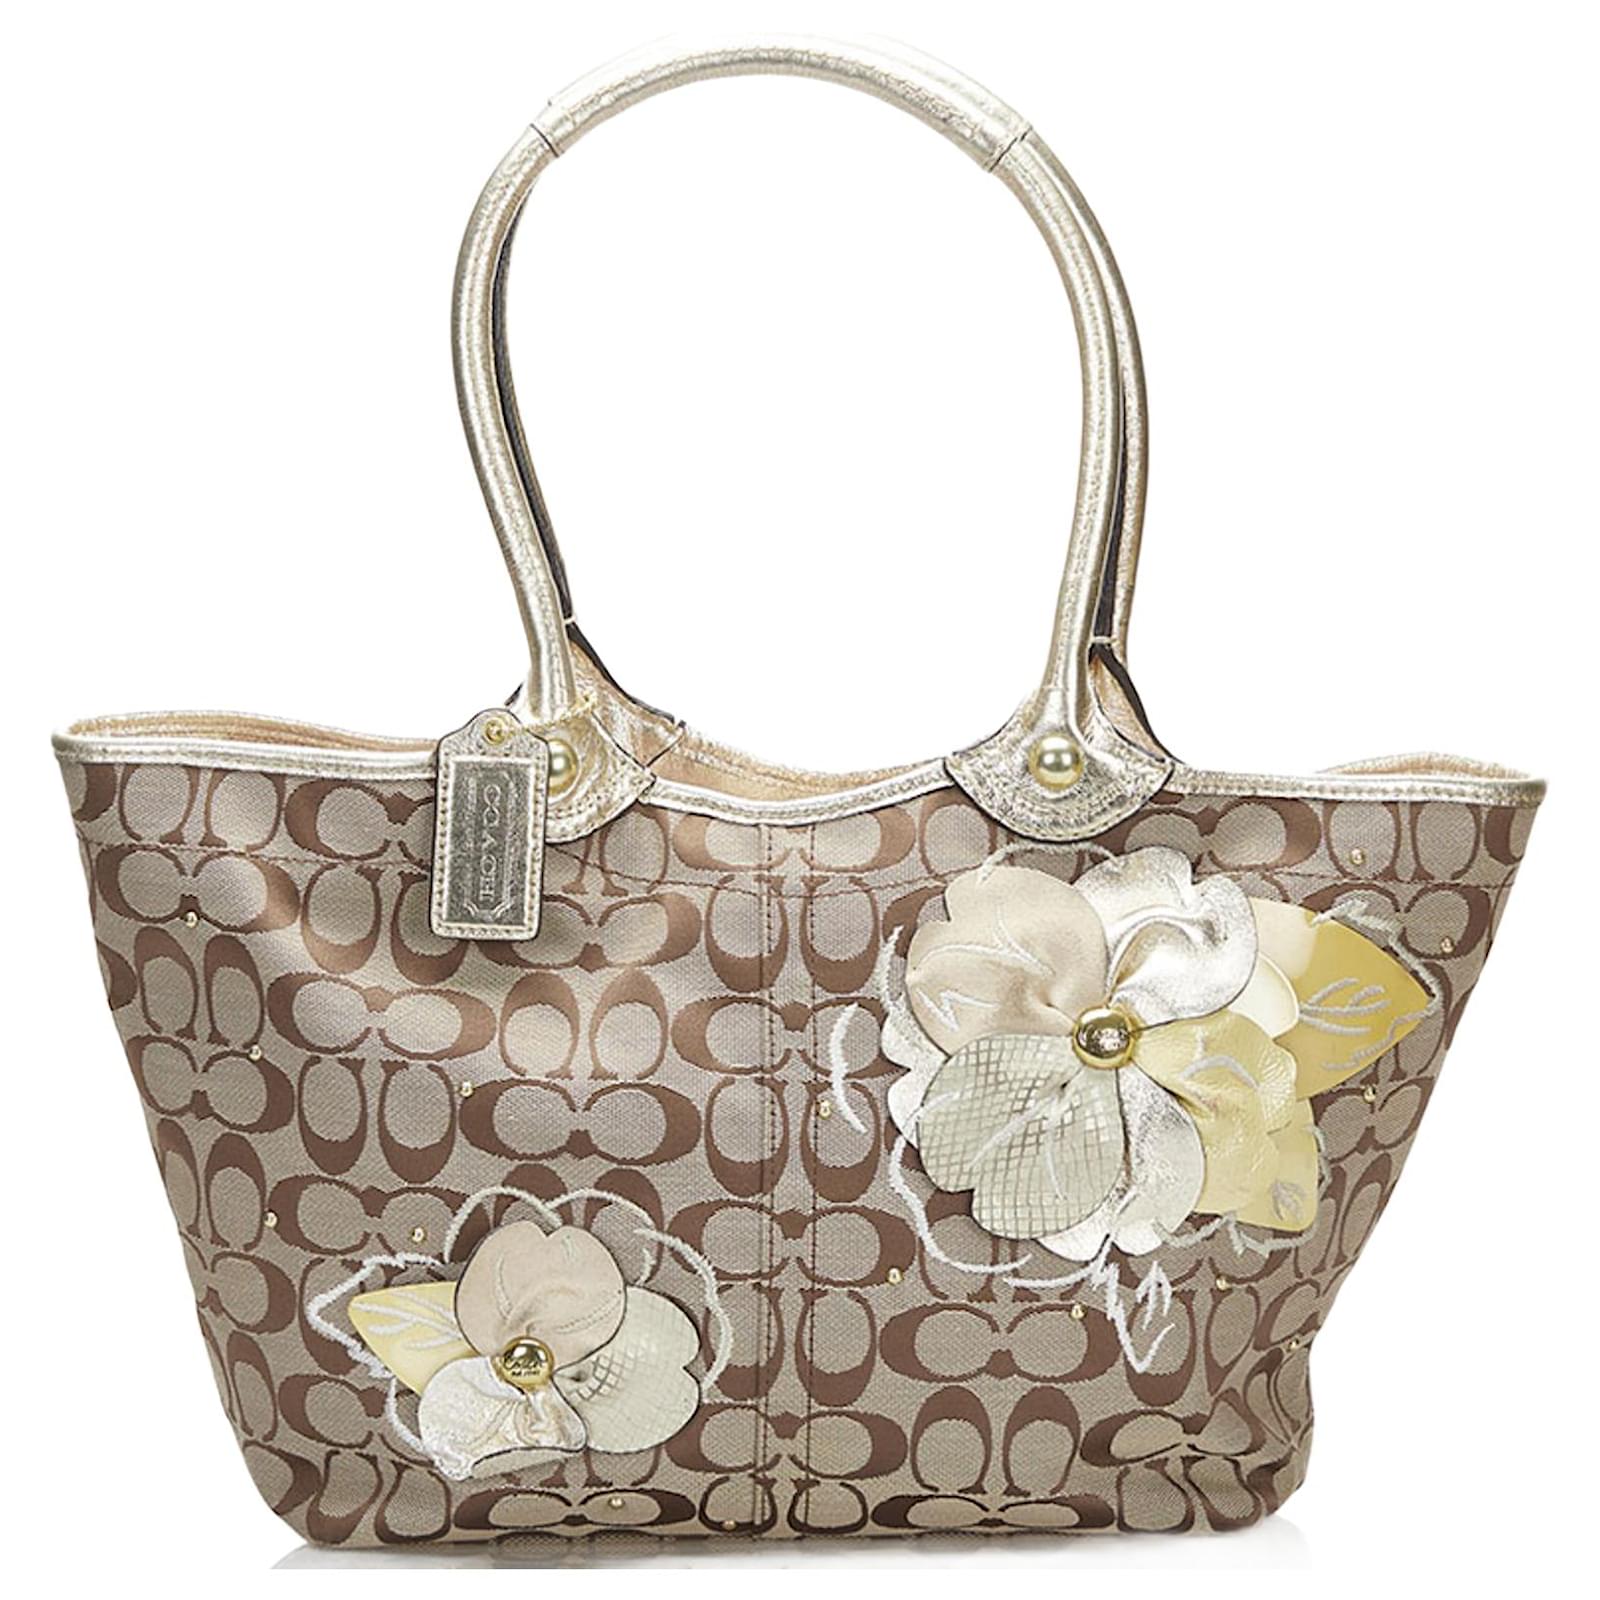 Coach White Floral Bee Duffle Crossbody Shoulder Bag F10871 for sale online  | eBay